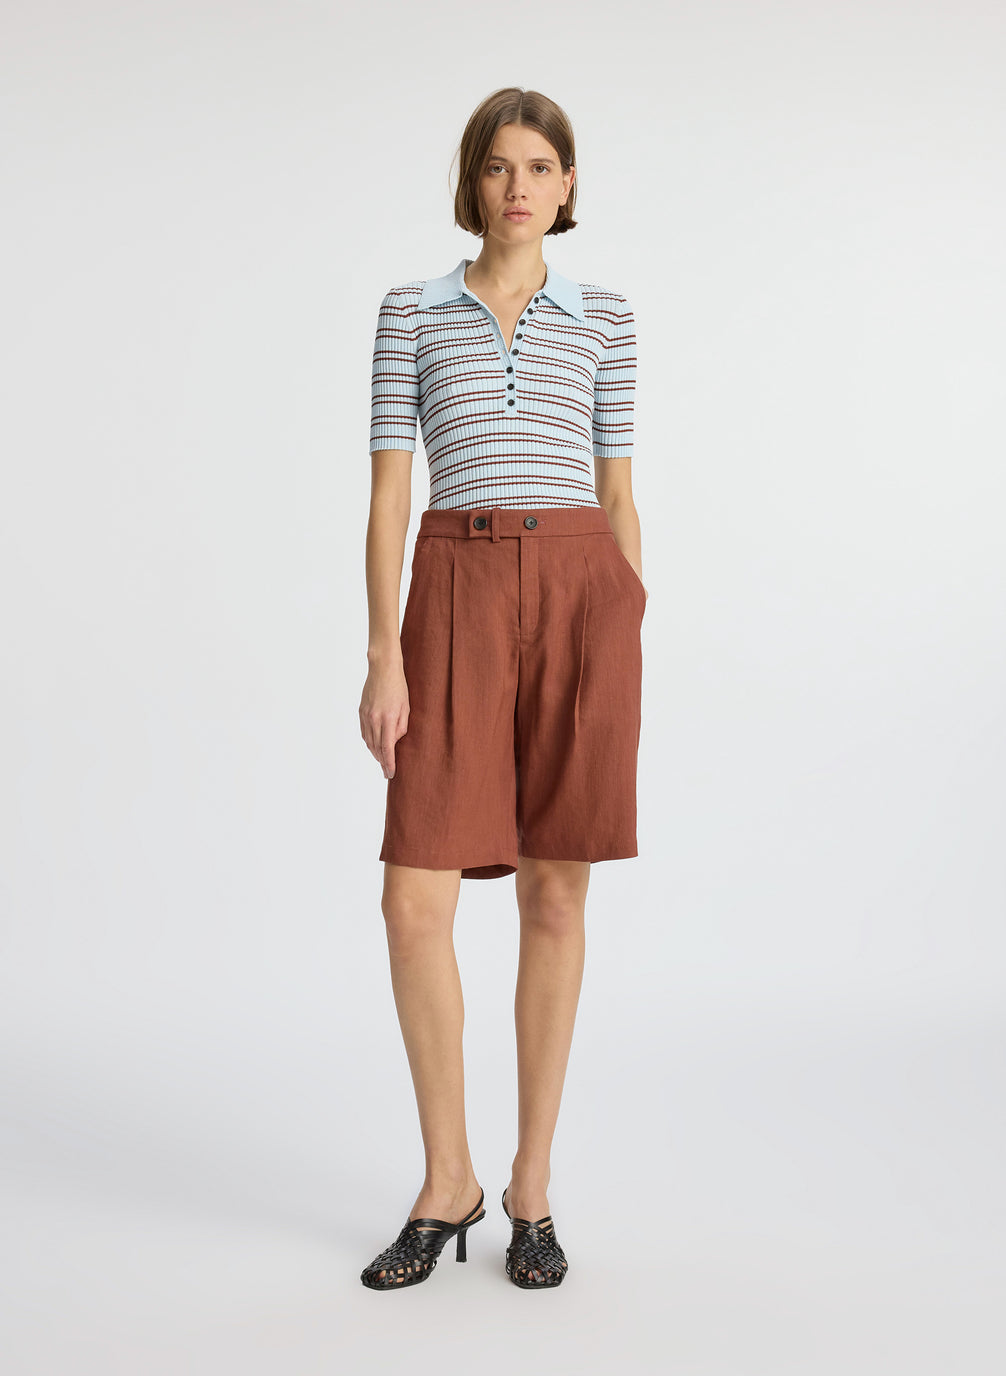 front view of woman wearing blue and brown striped shirt and brown shorts